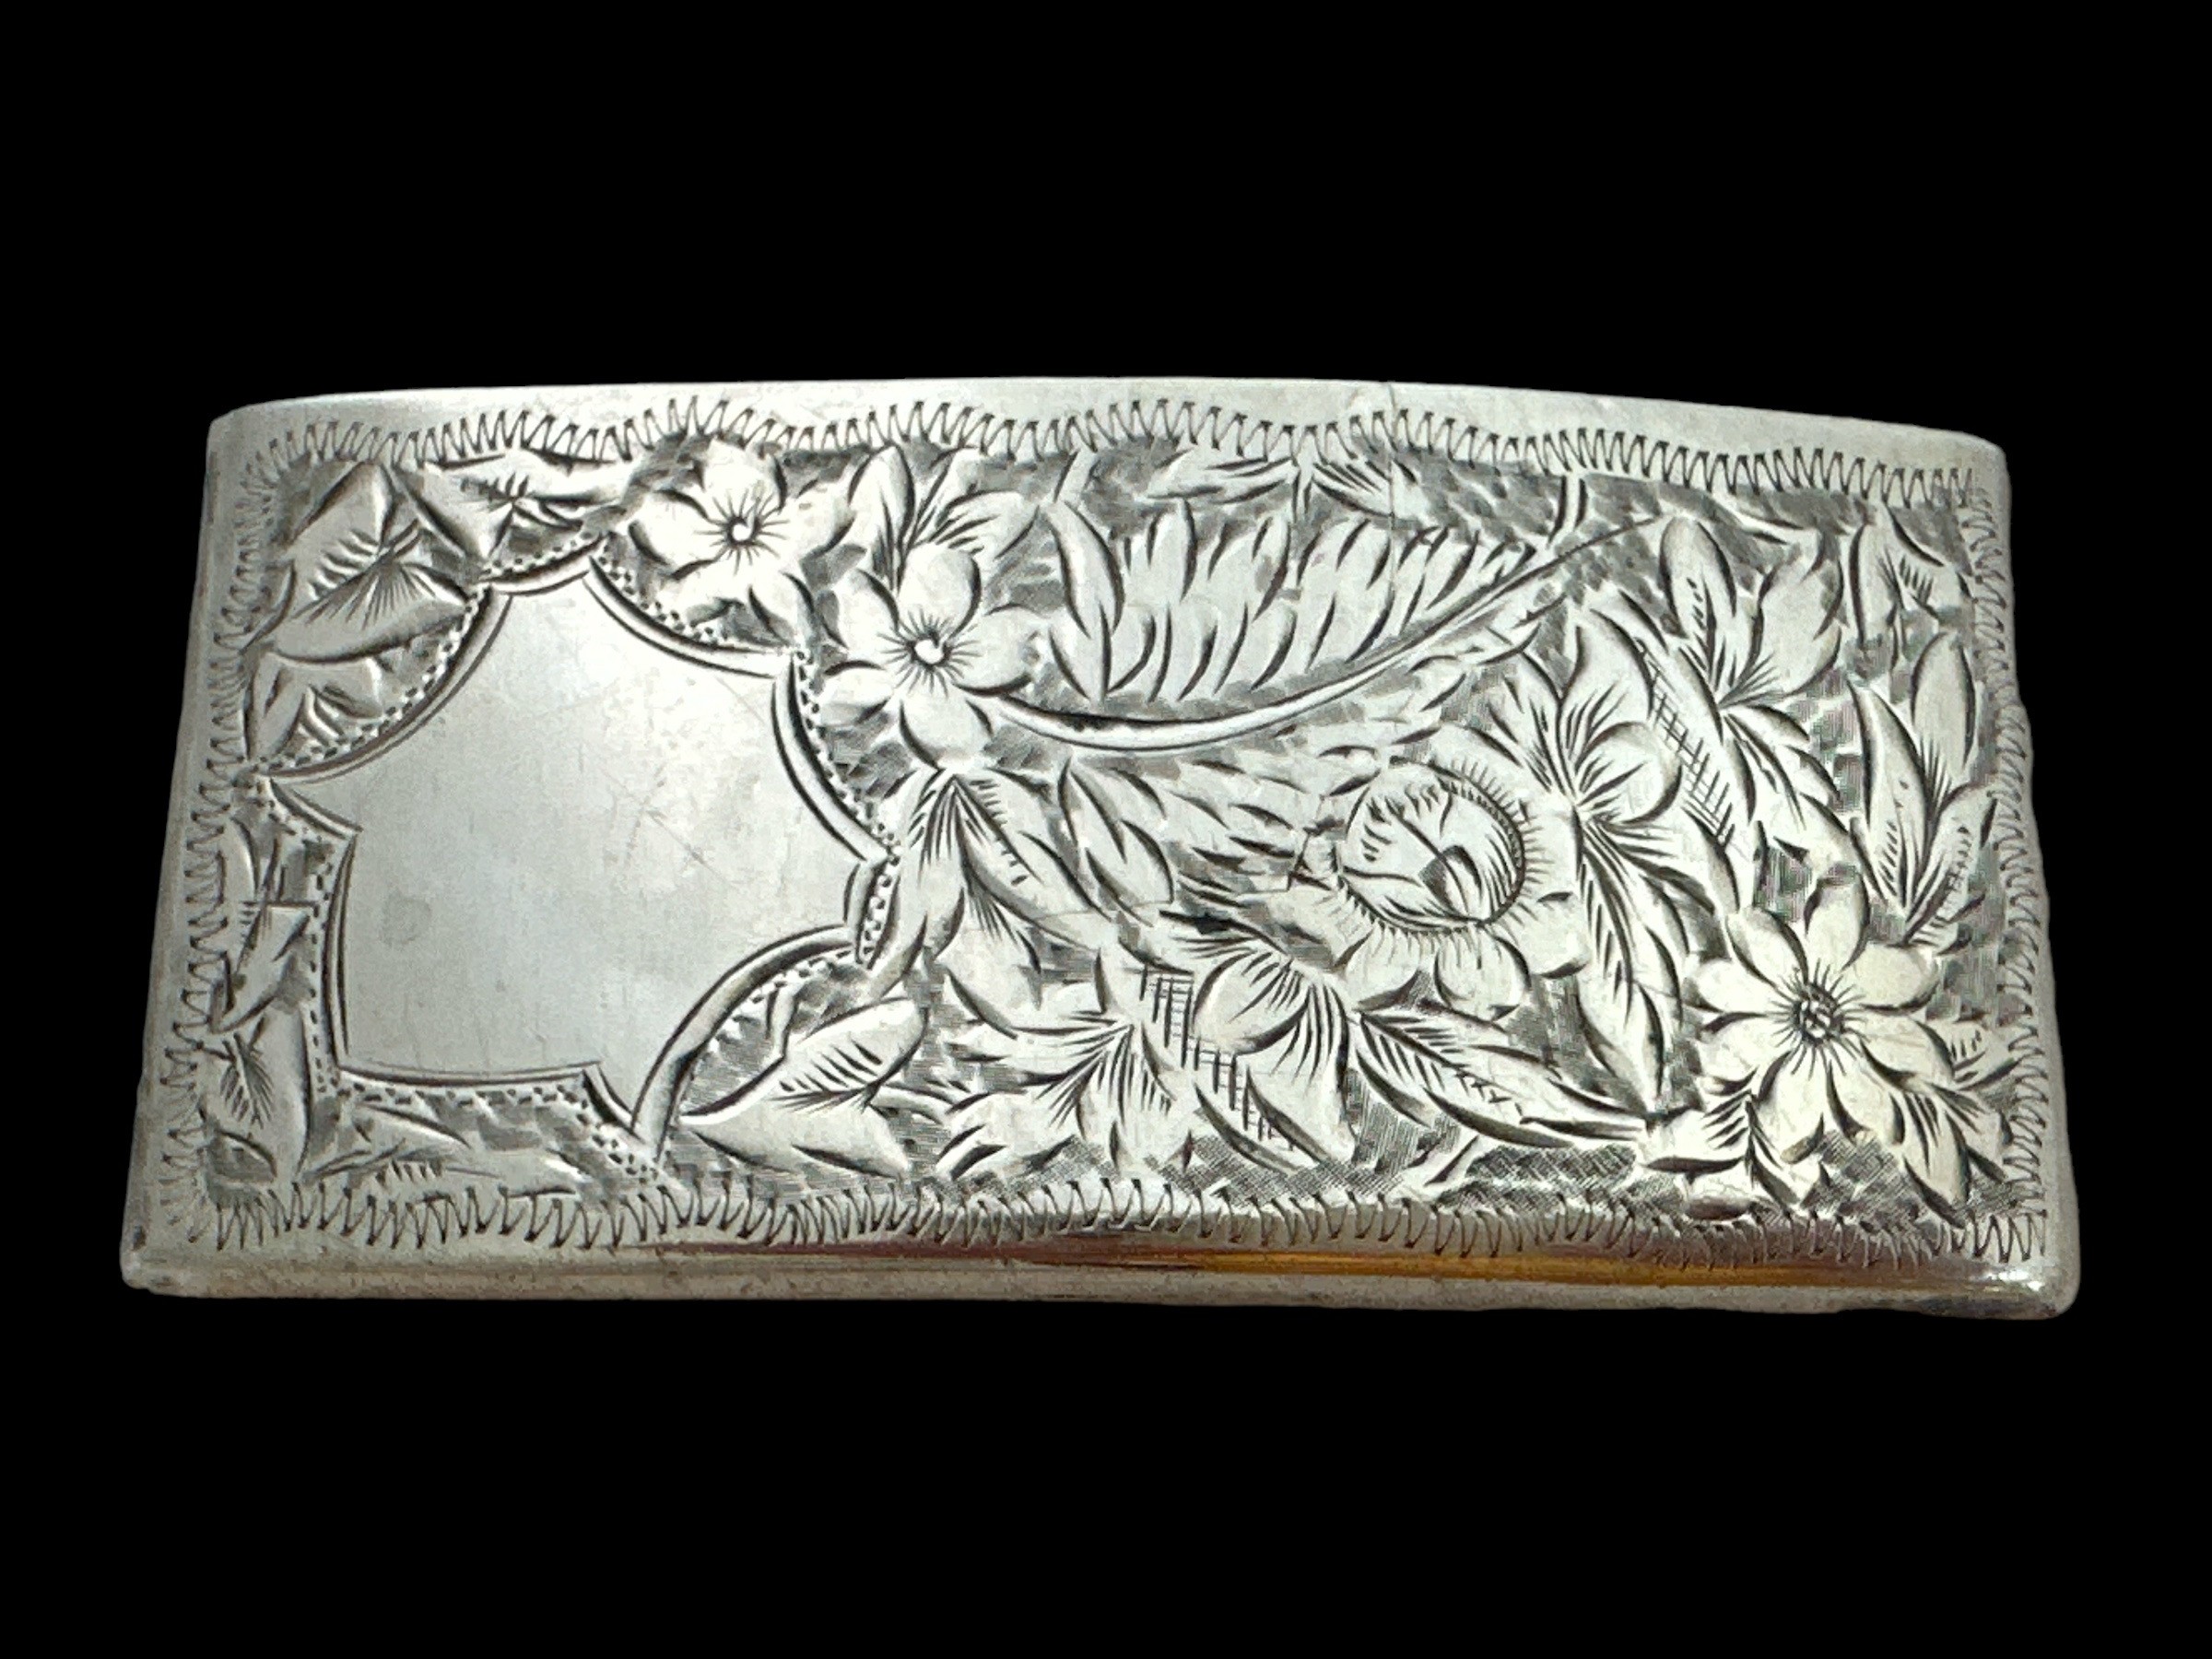 Silver calling card holder by Joseph Gloster with foliate design on back and front. 1898 - Image 2 of 2